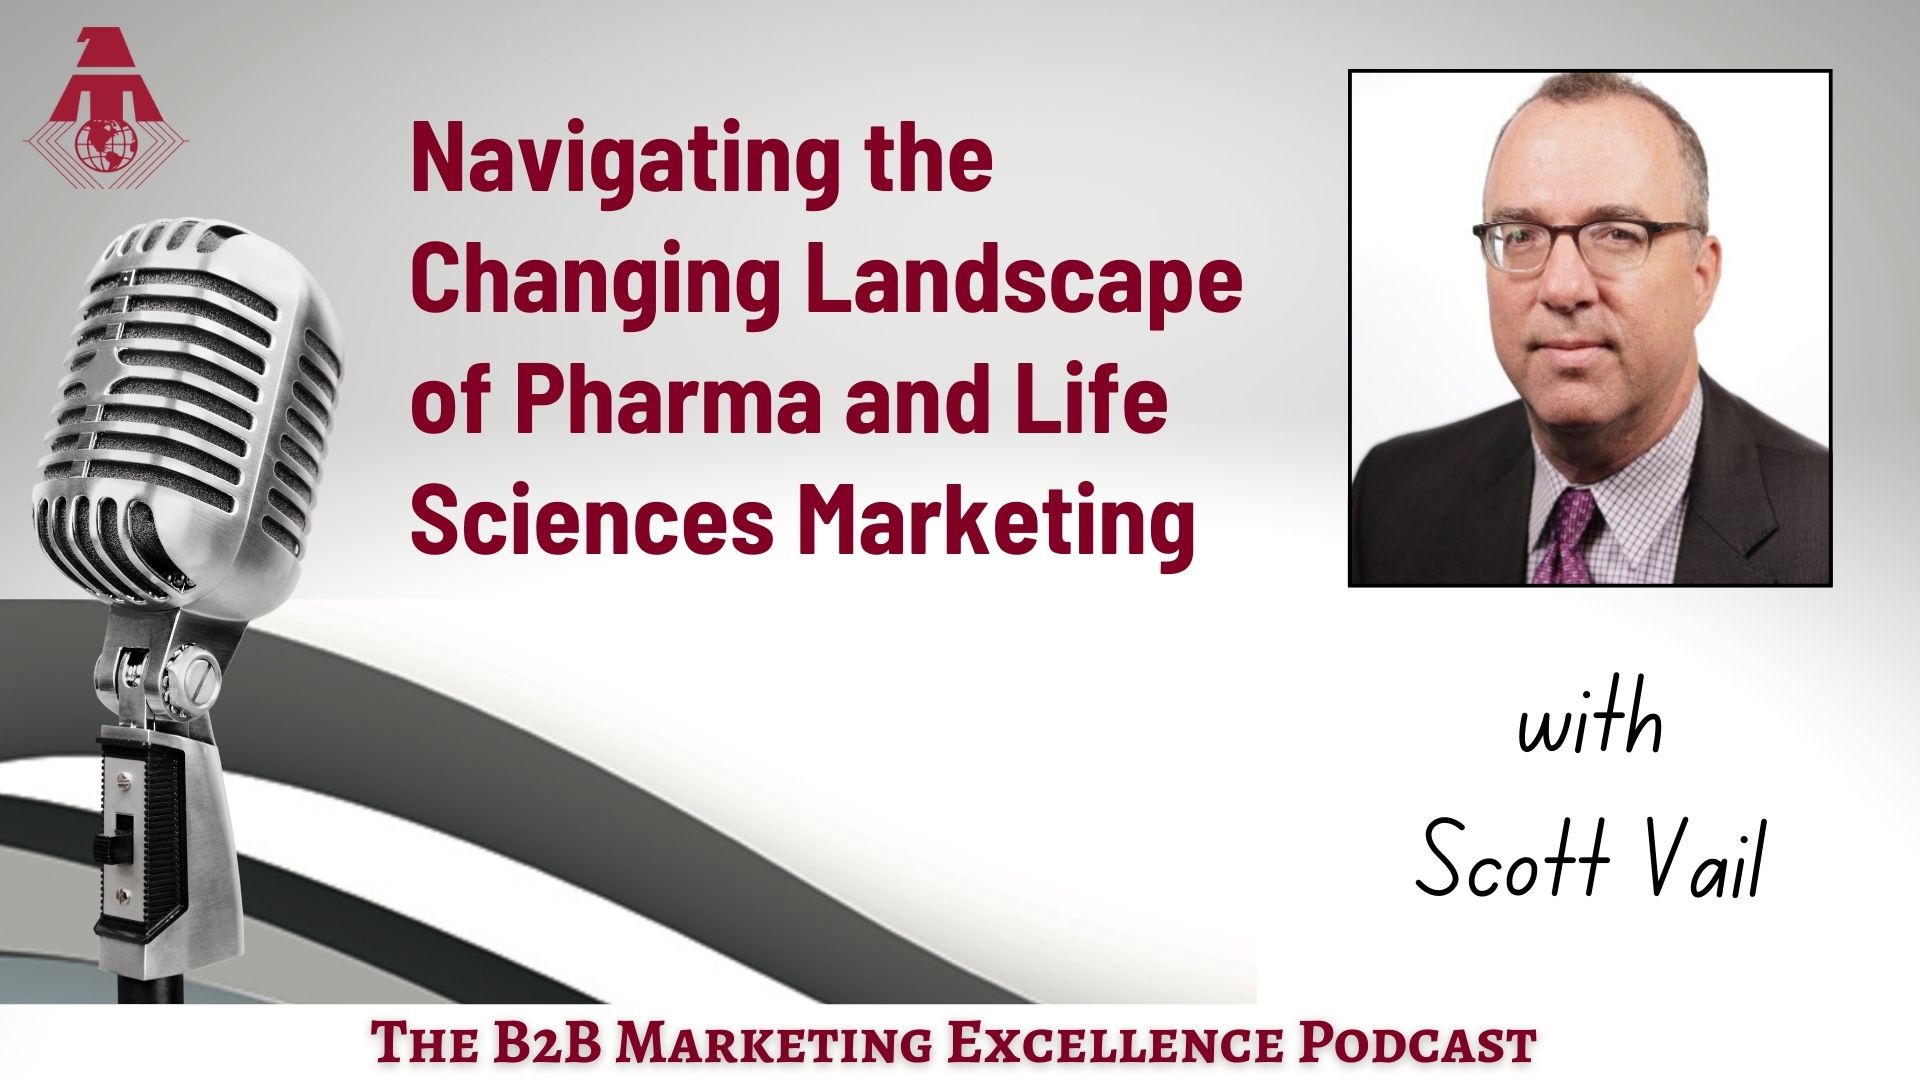 Podcast – Navigating the Changing Landscape of Pharma and Life Sciences Marketing